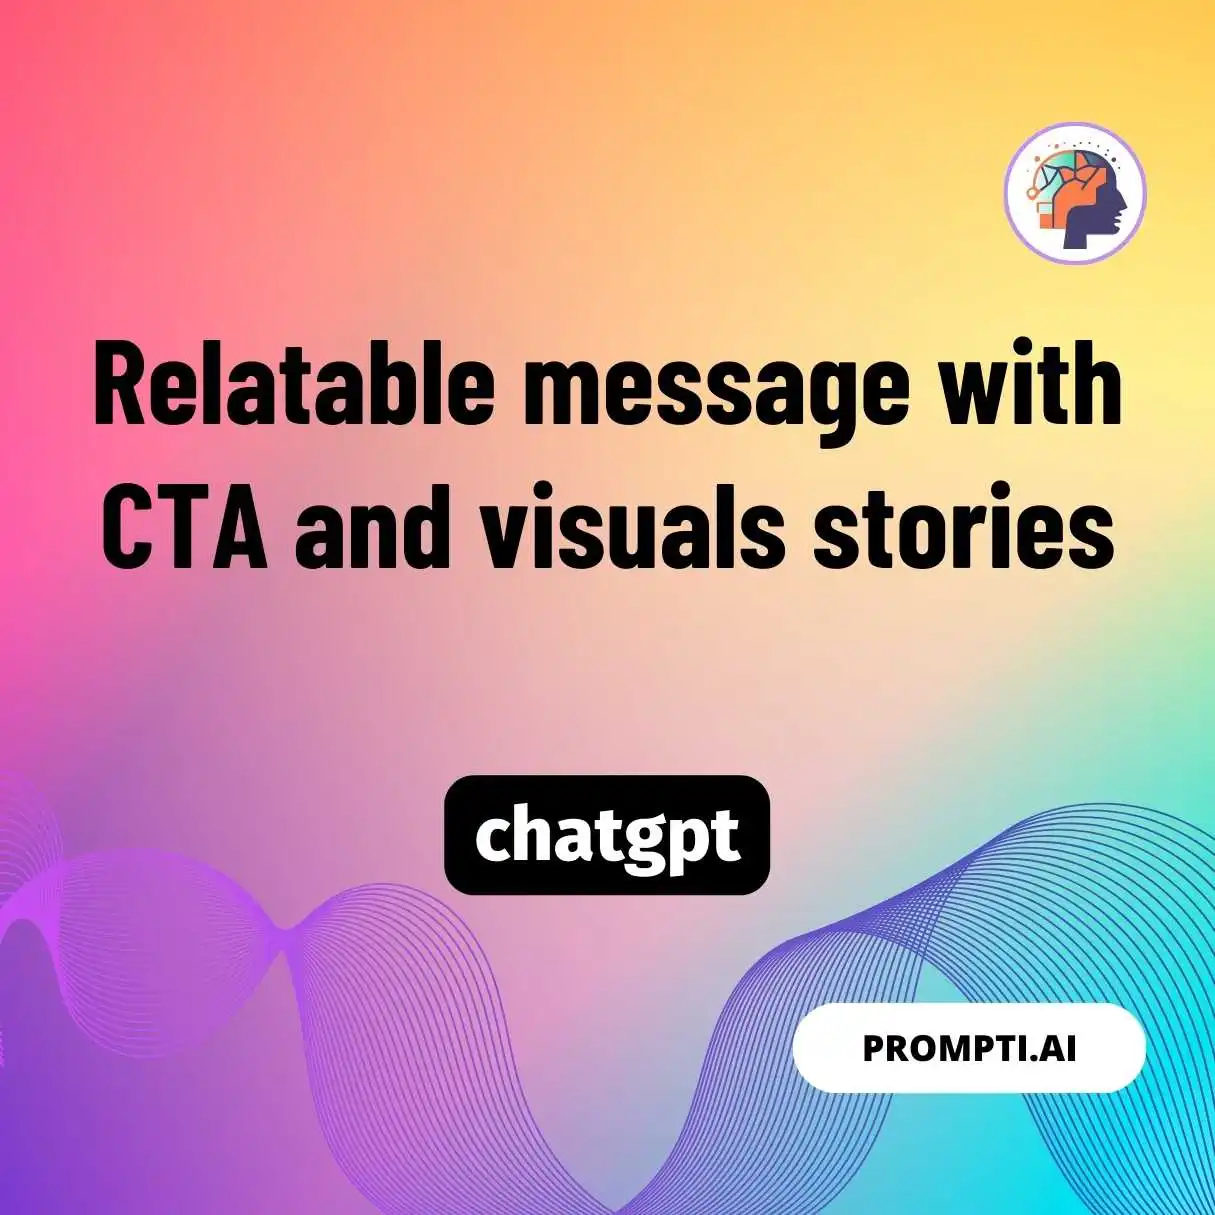 Relatable message with CTA and visuals stories